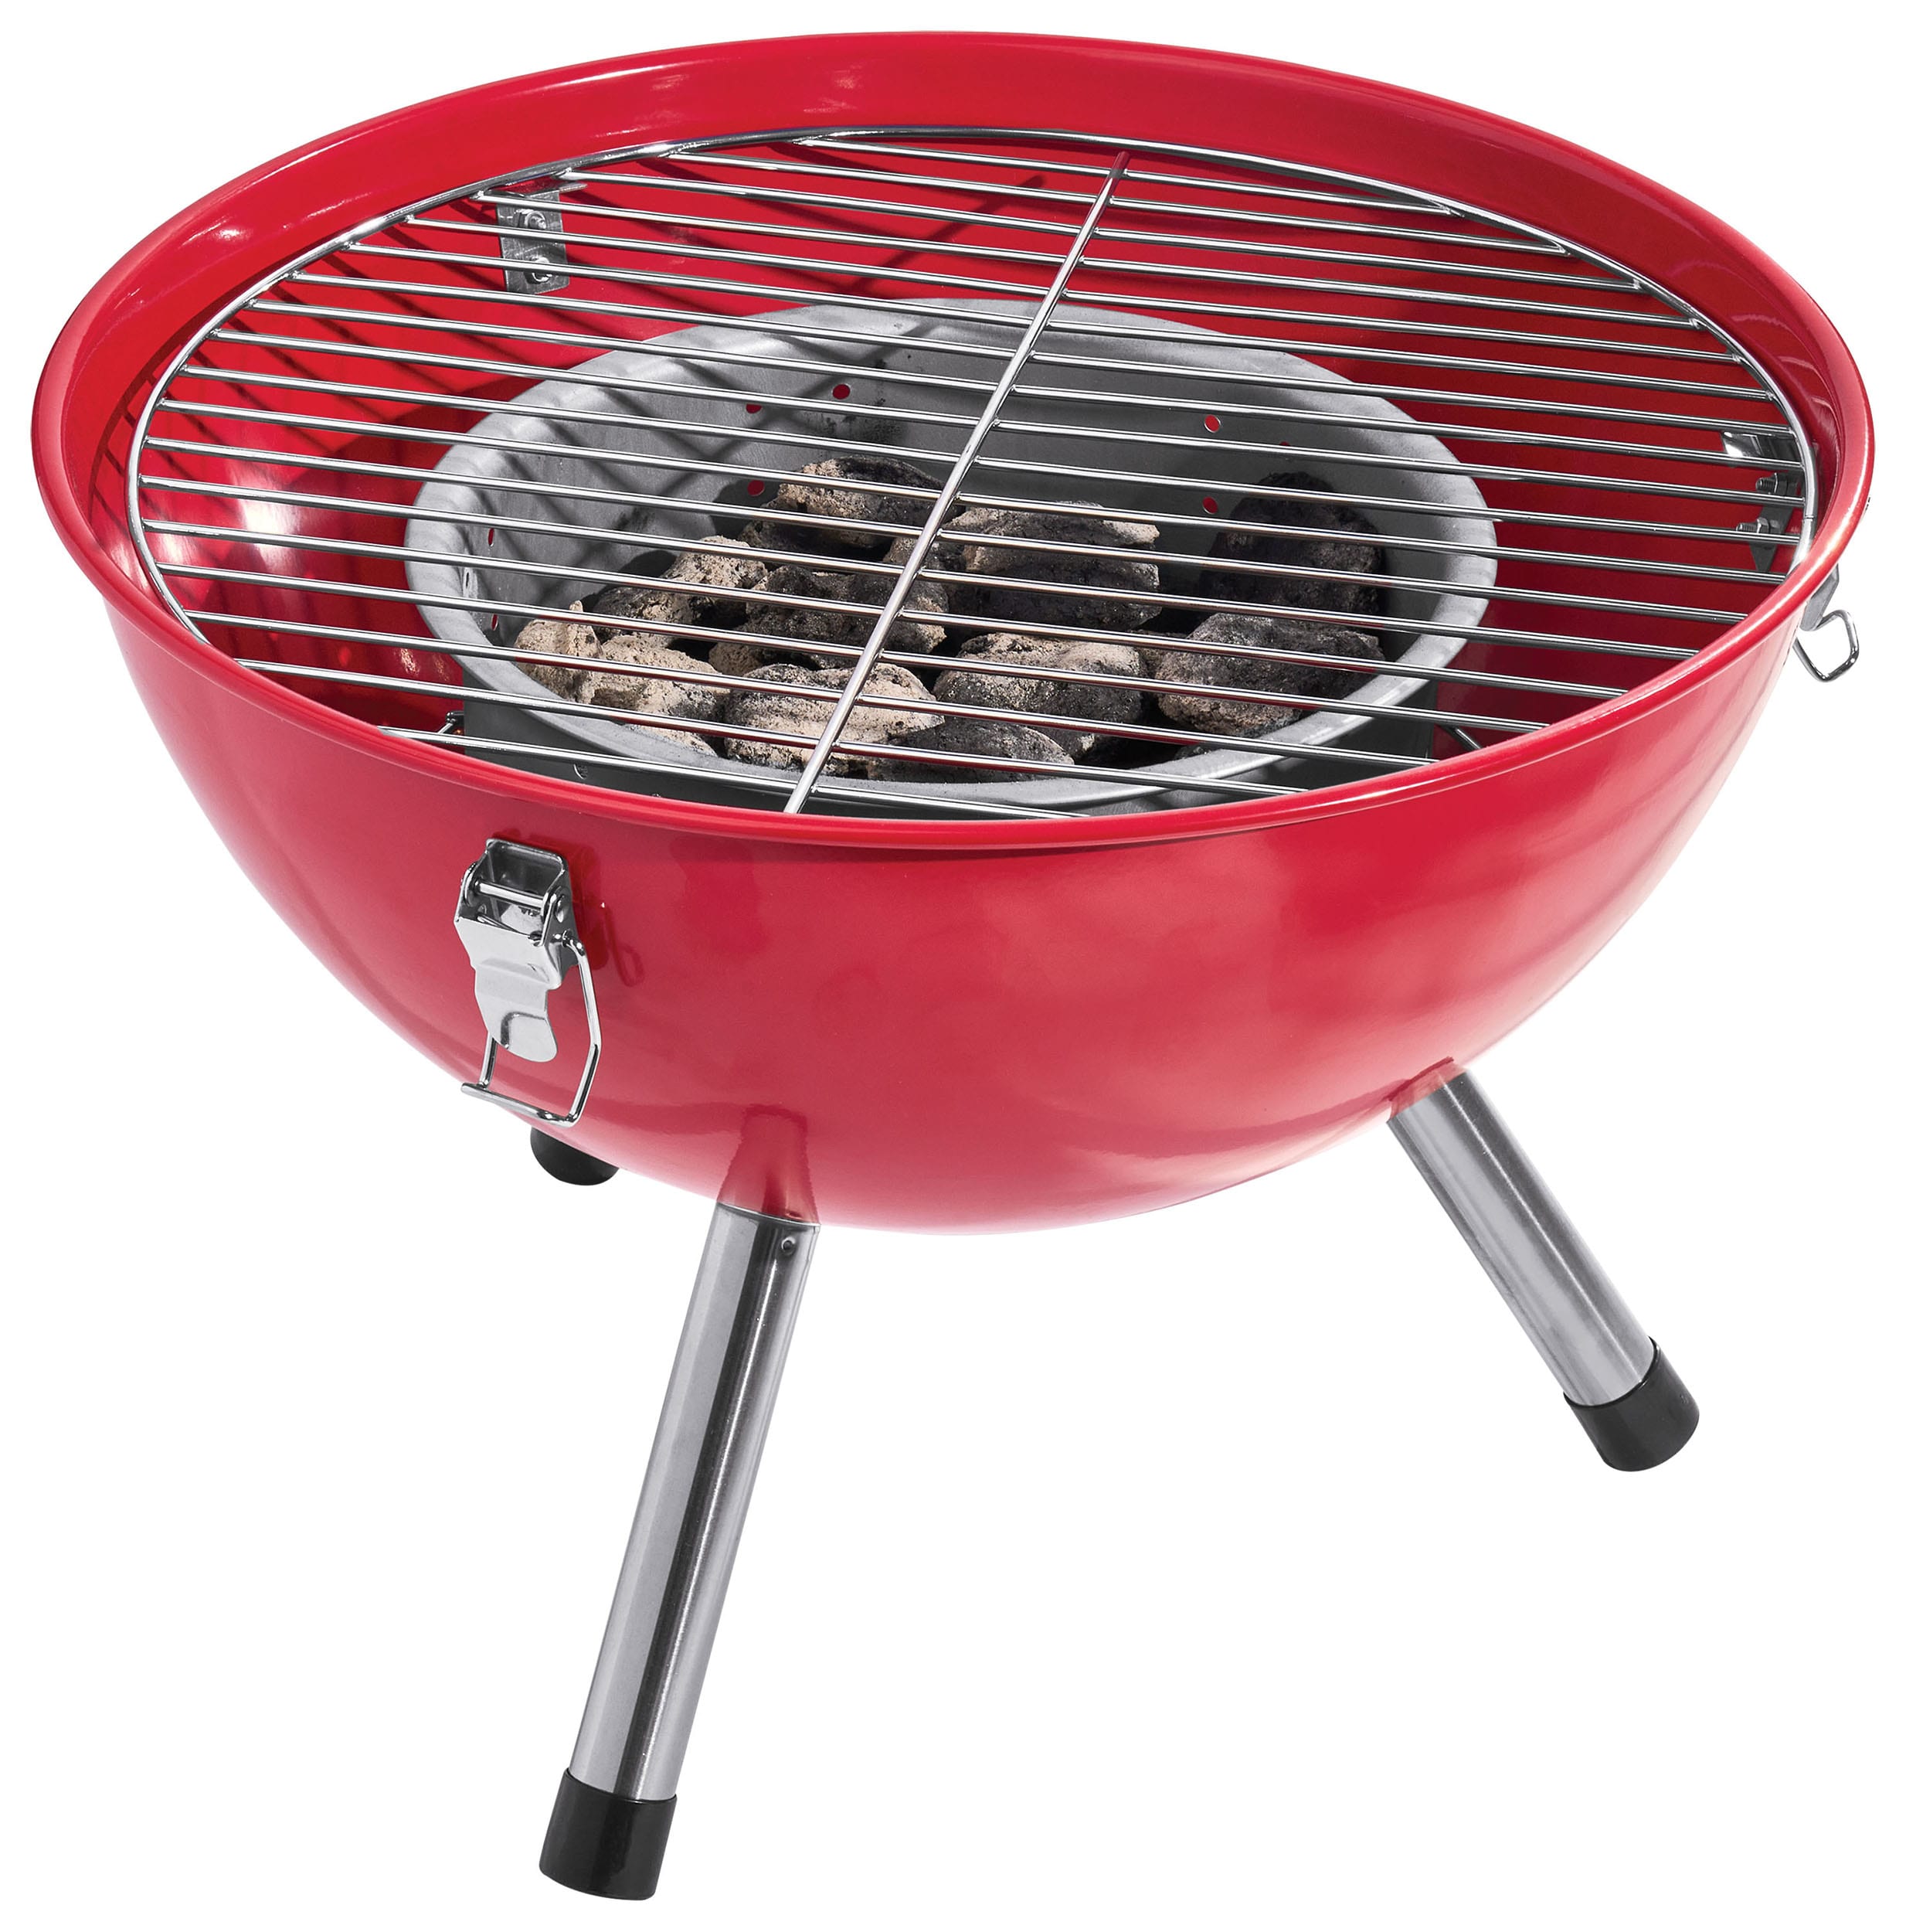 Bass Pro Shops® Bobber Table Top Charcoal Grill